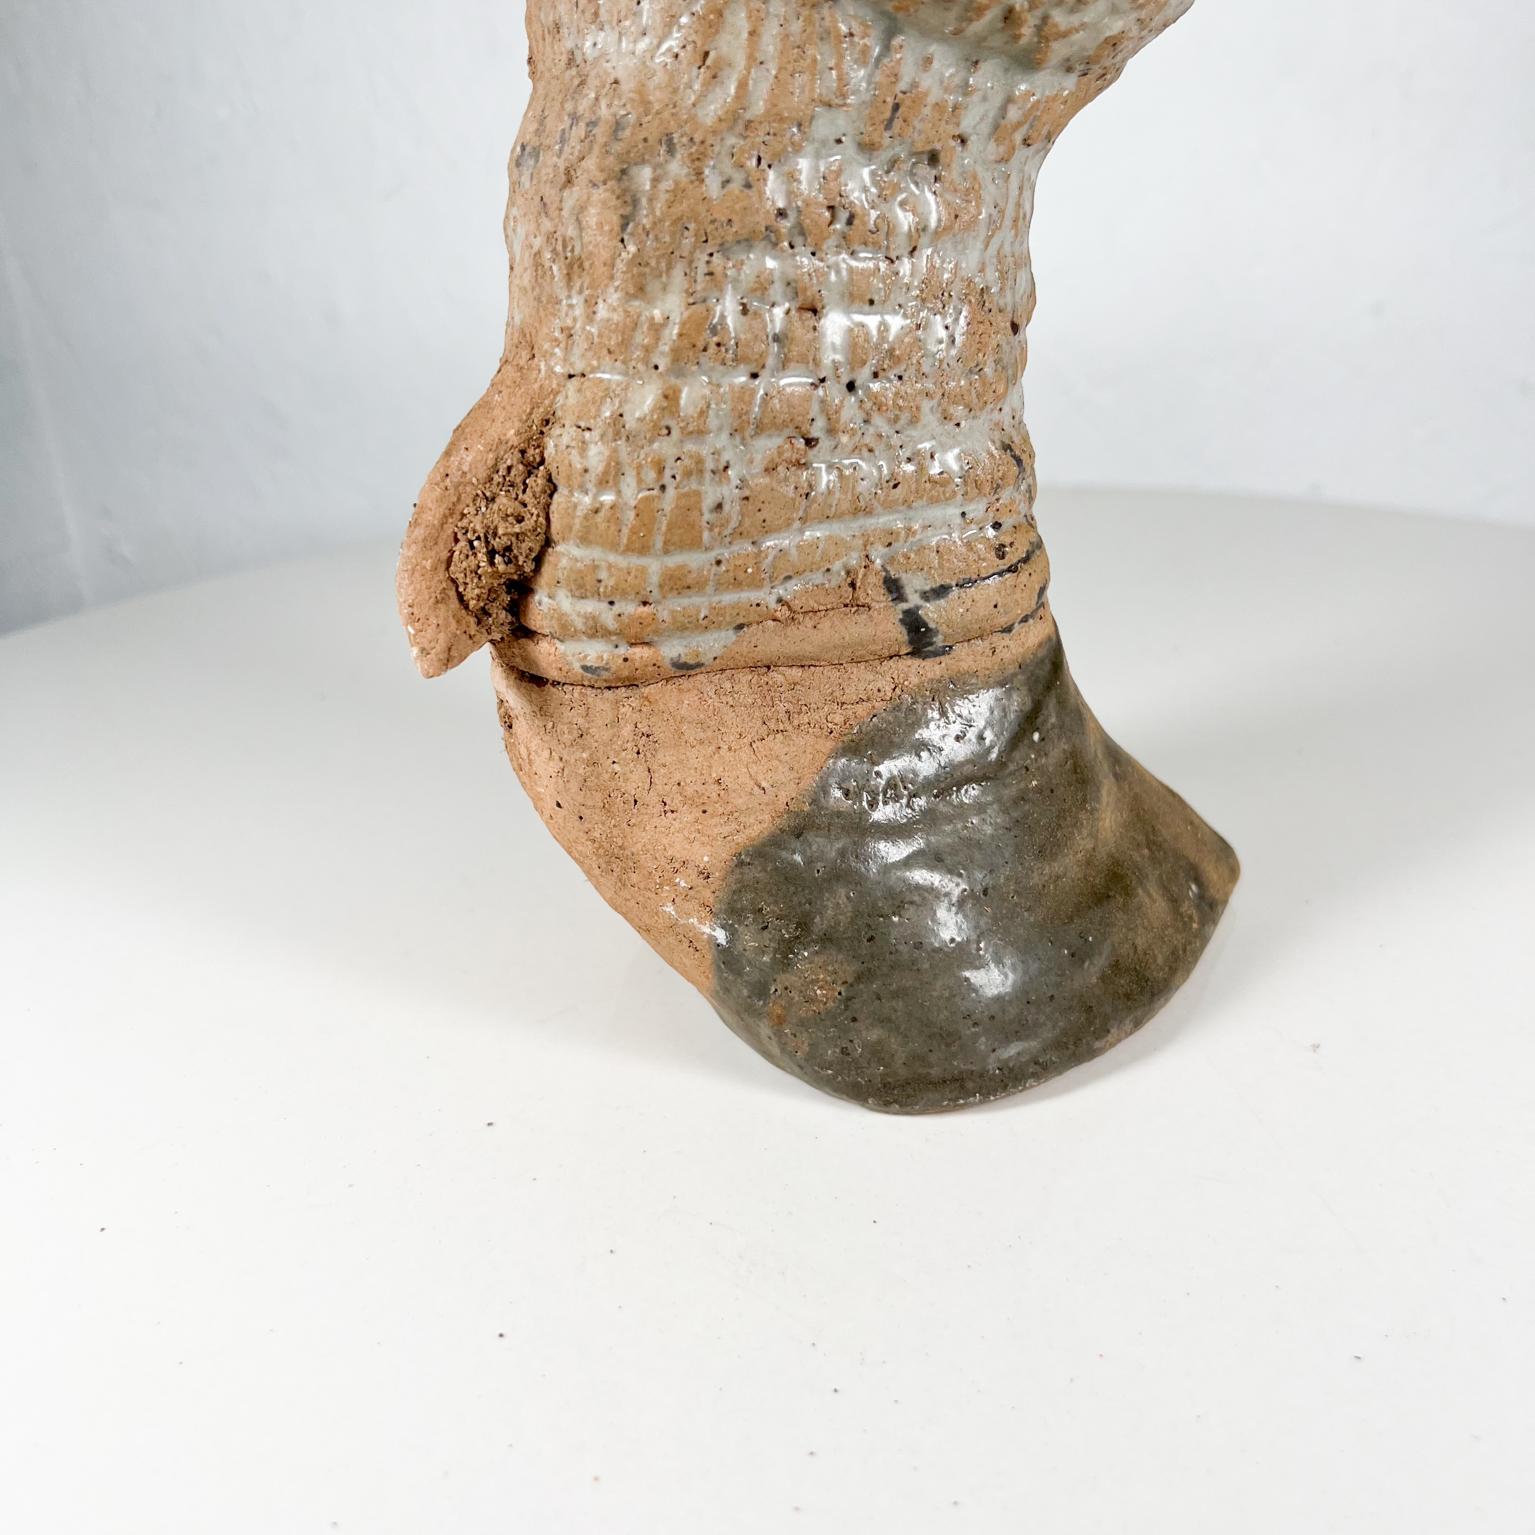 Organic Art Vintage Modern Pottery Textured Abstract Hoof Sculpture For Sale 2